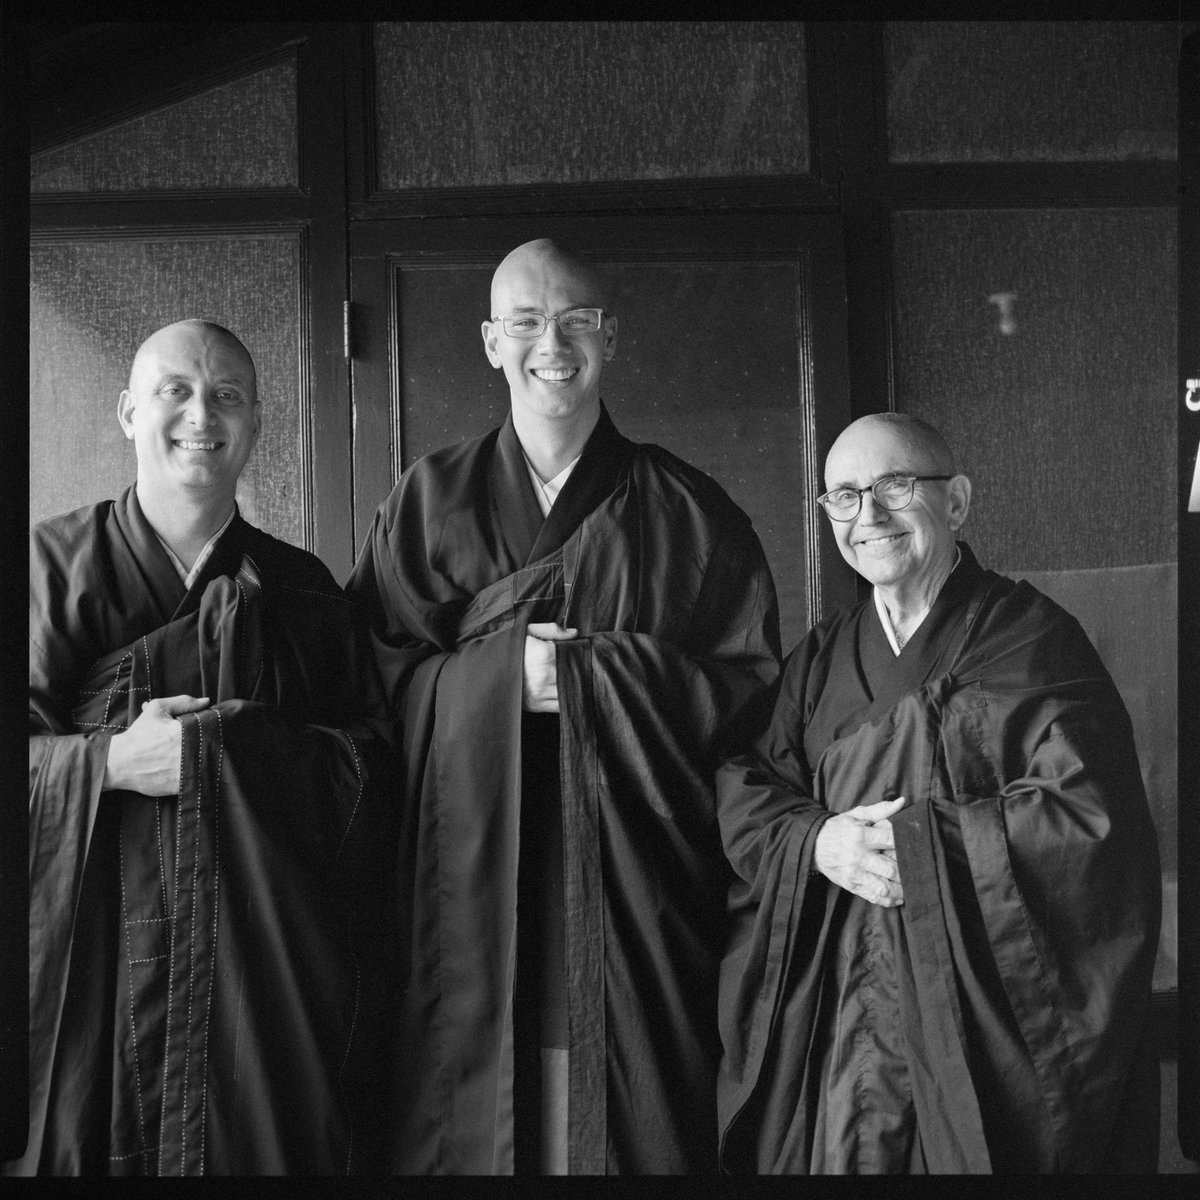 Image description: black and white photo of three men with shaved heads smiling into the camera, dressed in black robes.